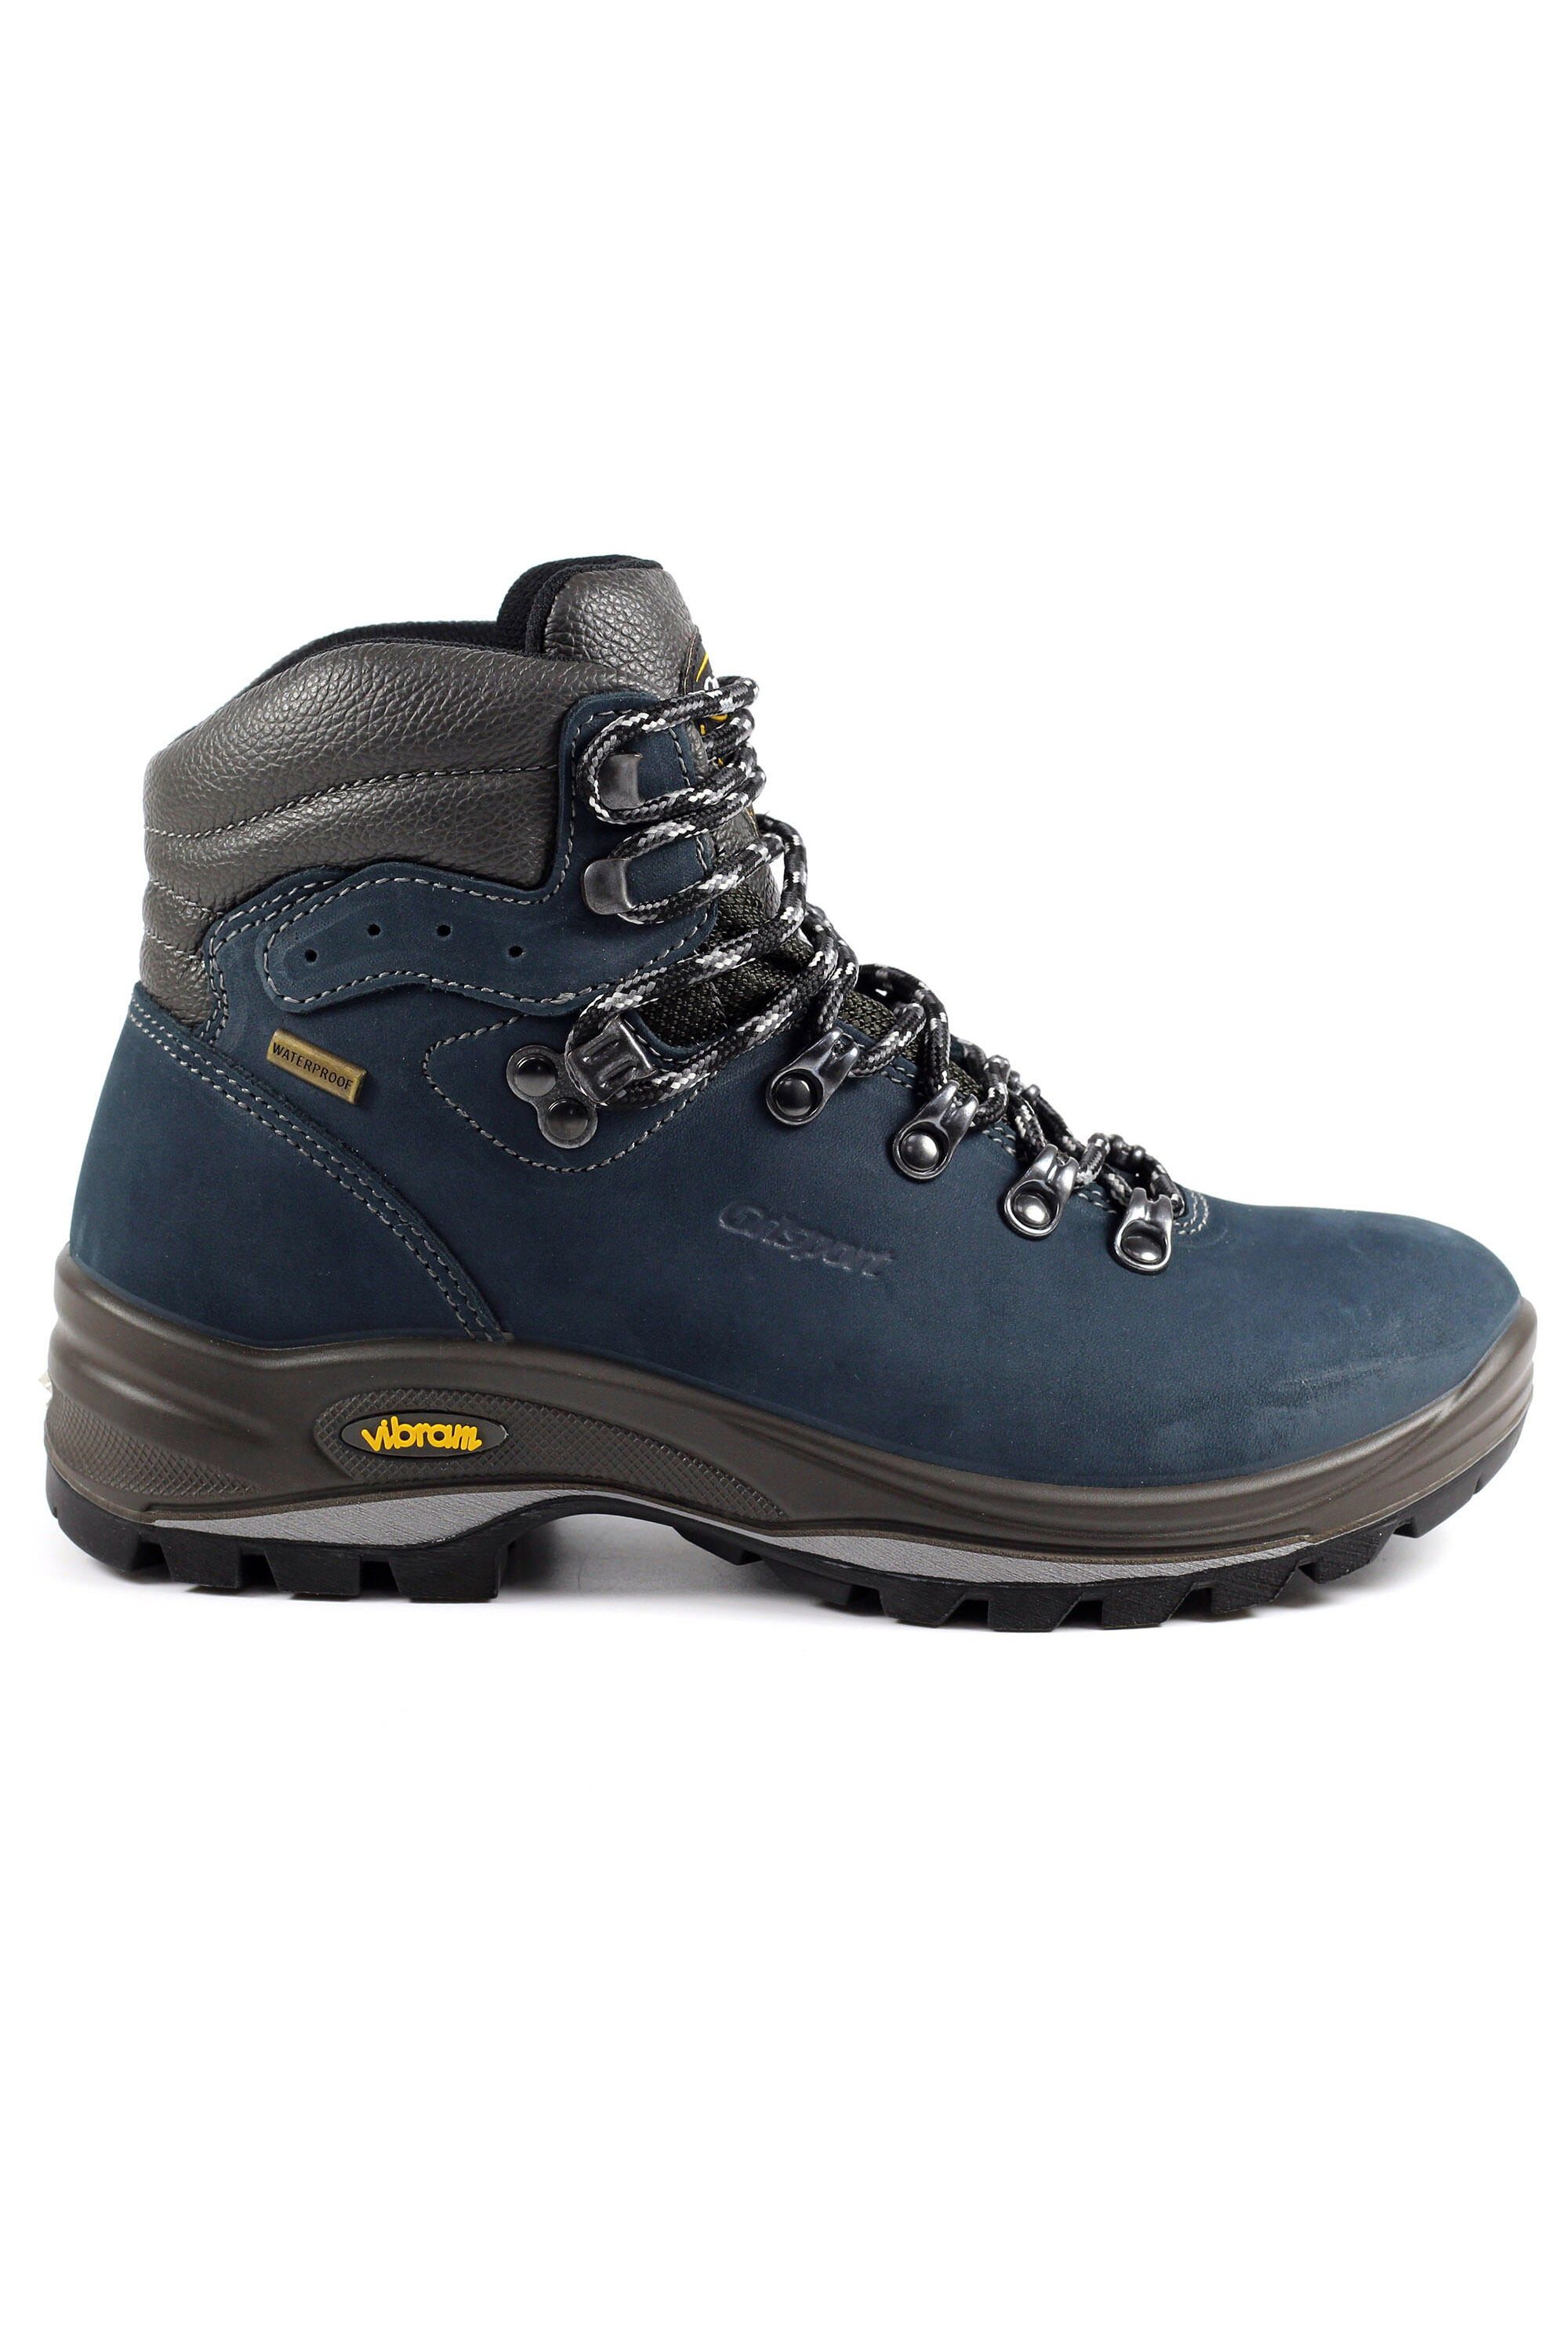 Lady Tempest Blue Waterproof Hiking Boot 2/5